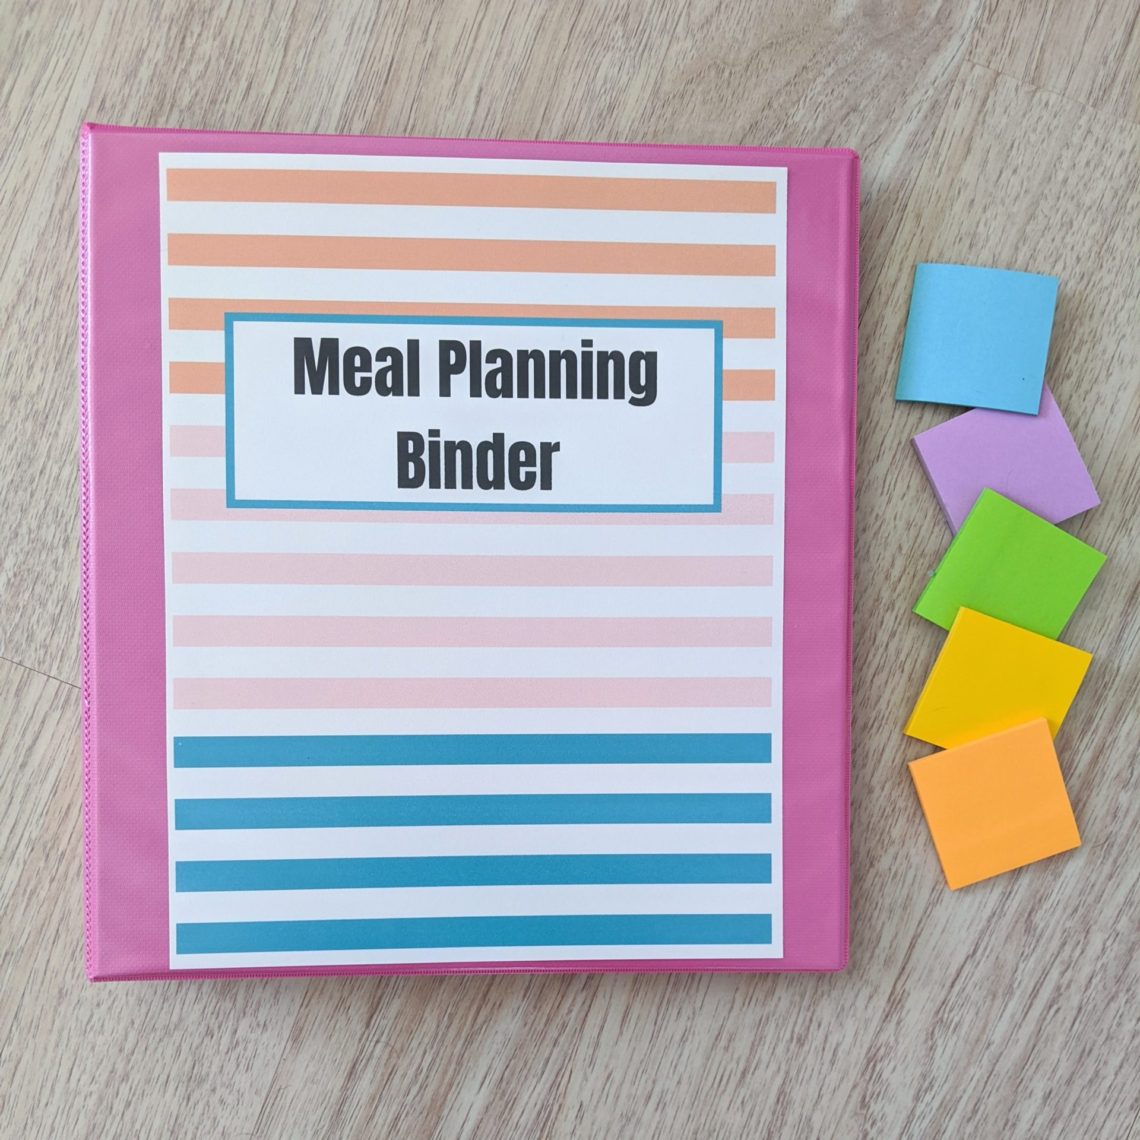 Sticky note meal planning binder. Download these free printables to create a binder of recipes to use with meal planning! Use post it notes to plan your weekly meals and save your favorites in the binder! #stickynotes #postitnotes #mealplanning #binder #diy #freeprintables